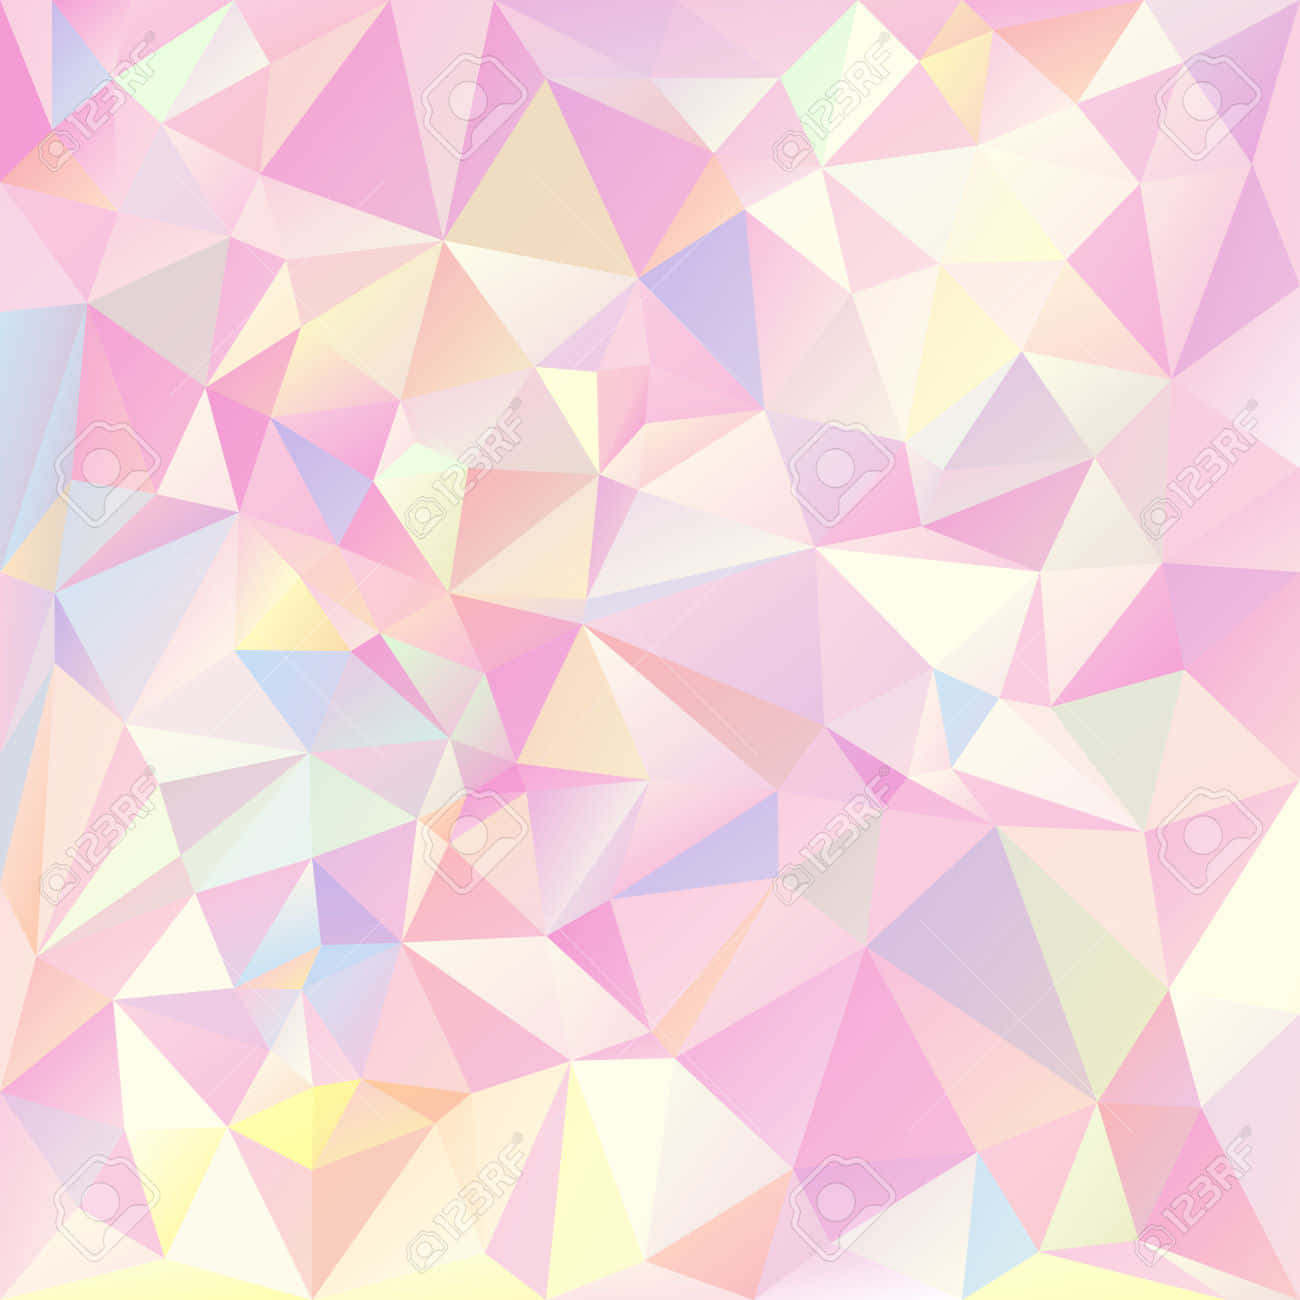 Refreshing blend of pink, yellow, and blue Wallpaper